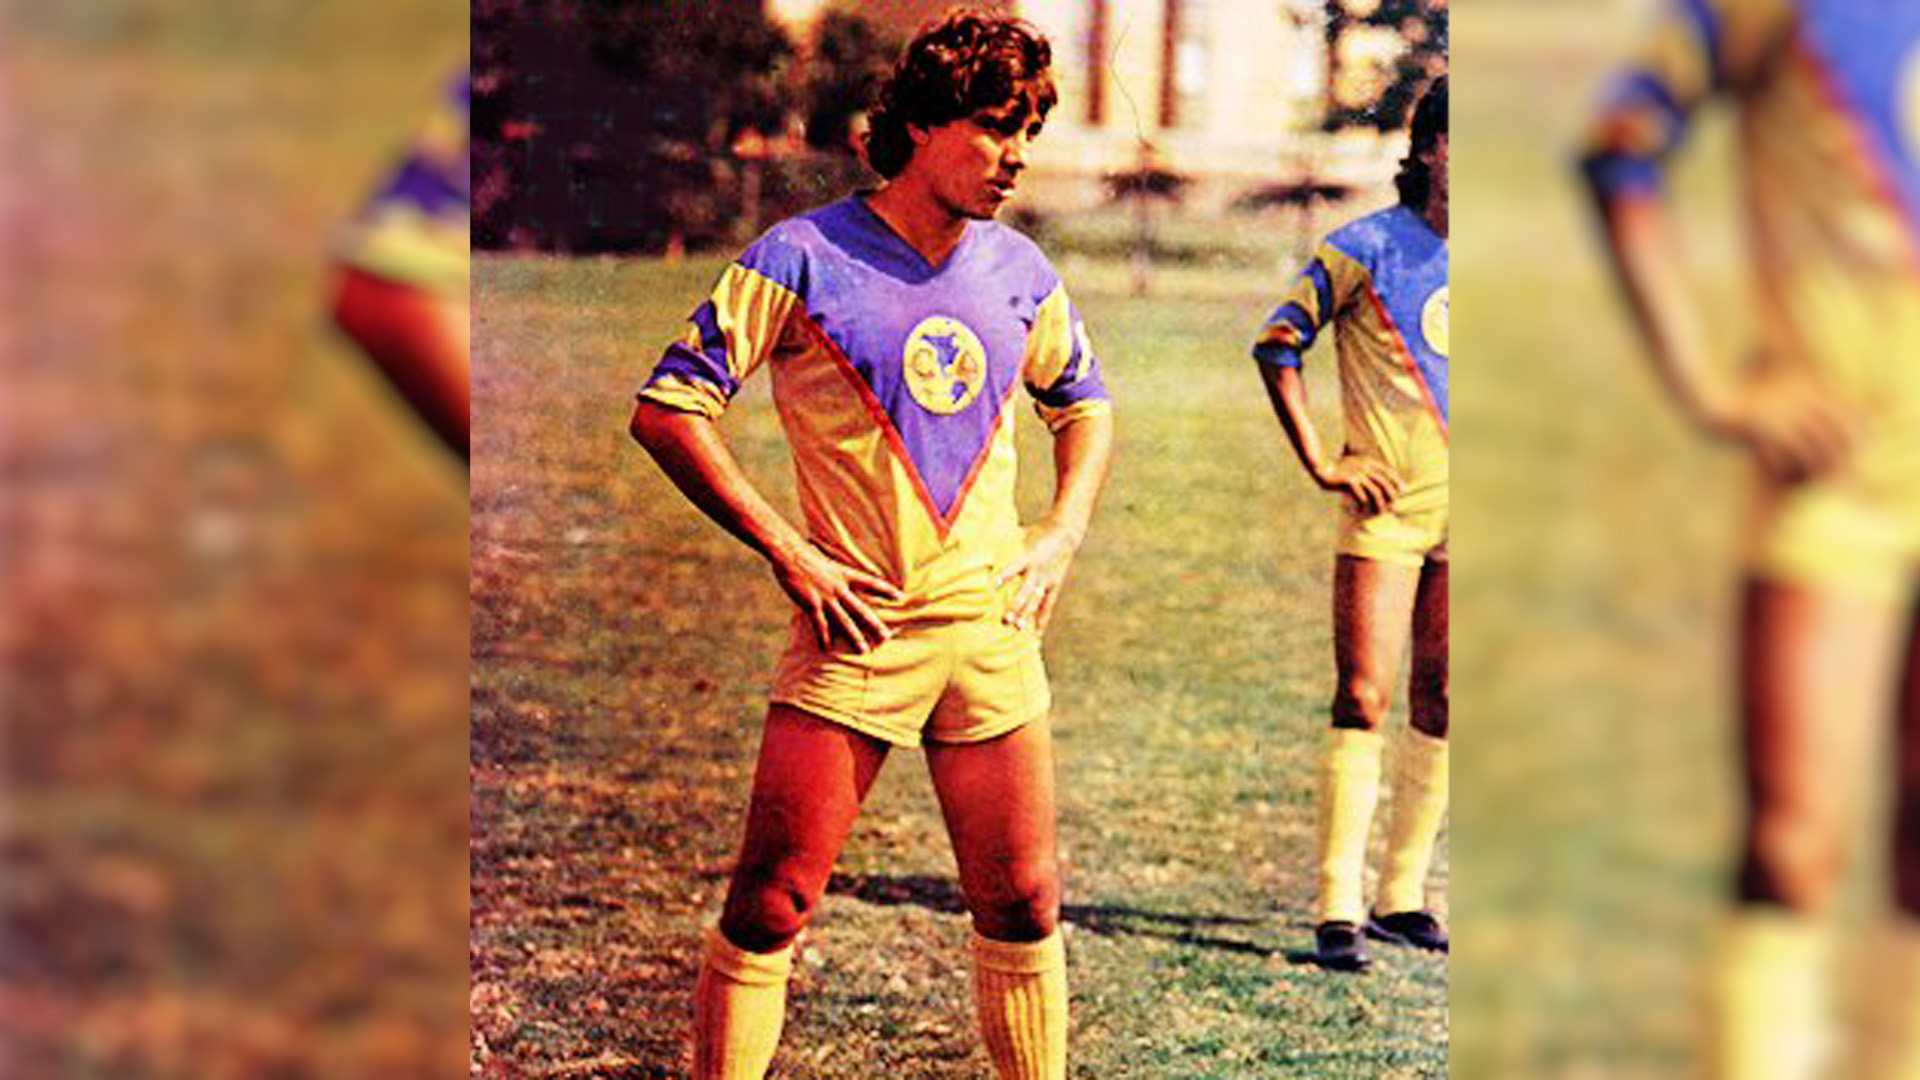 As a professional footballer he won five titles with the Águilas del América (Photo: Twitter/@realidadamerica)